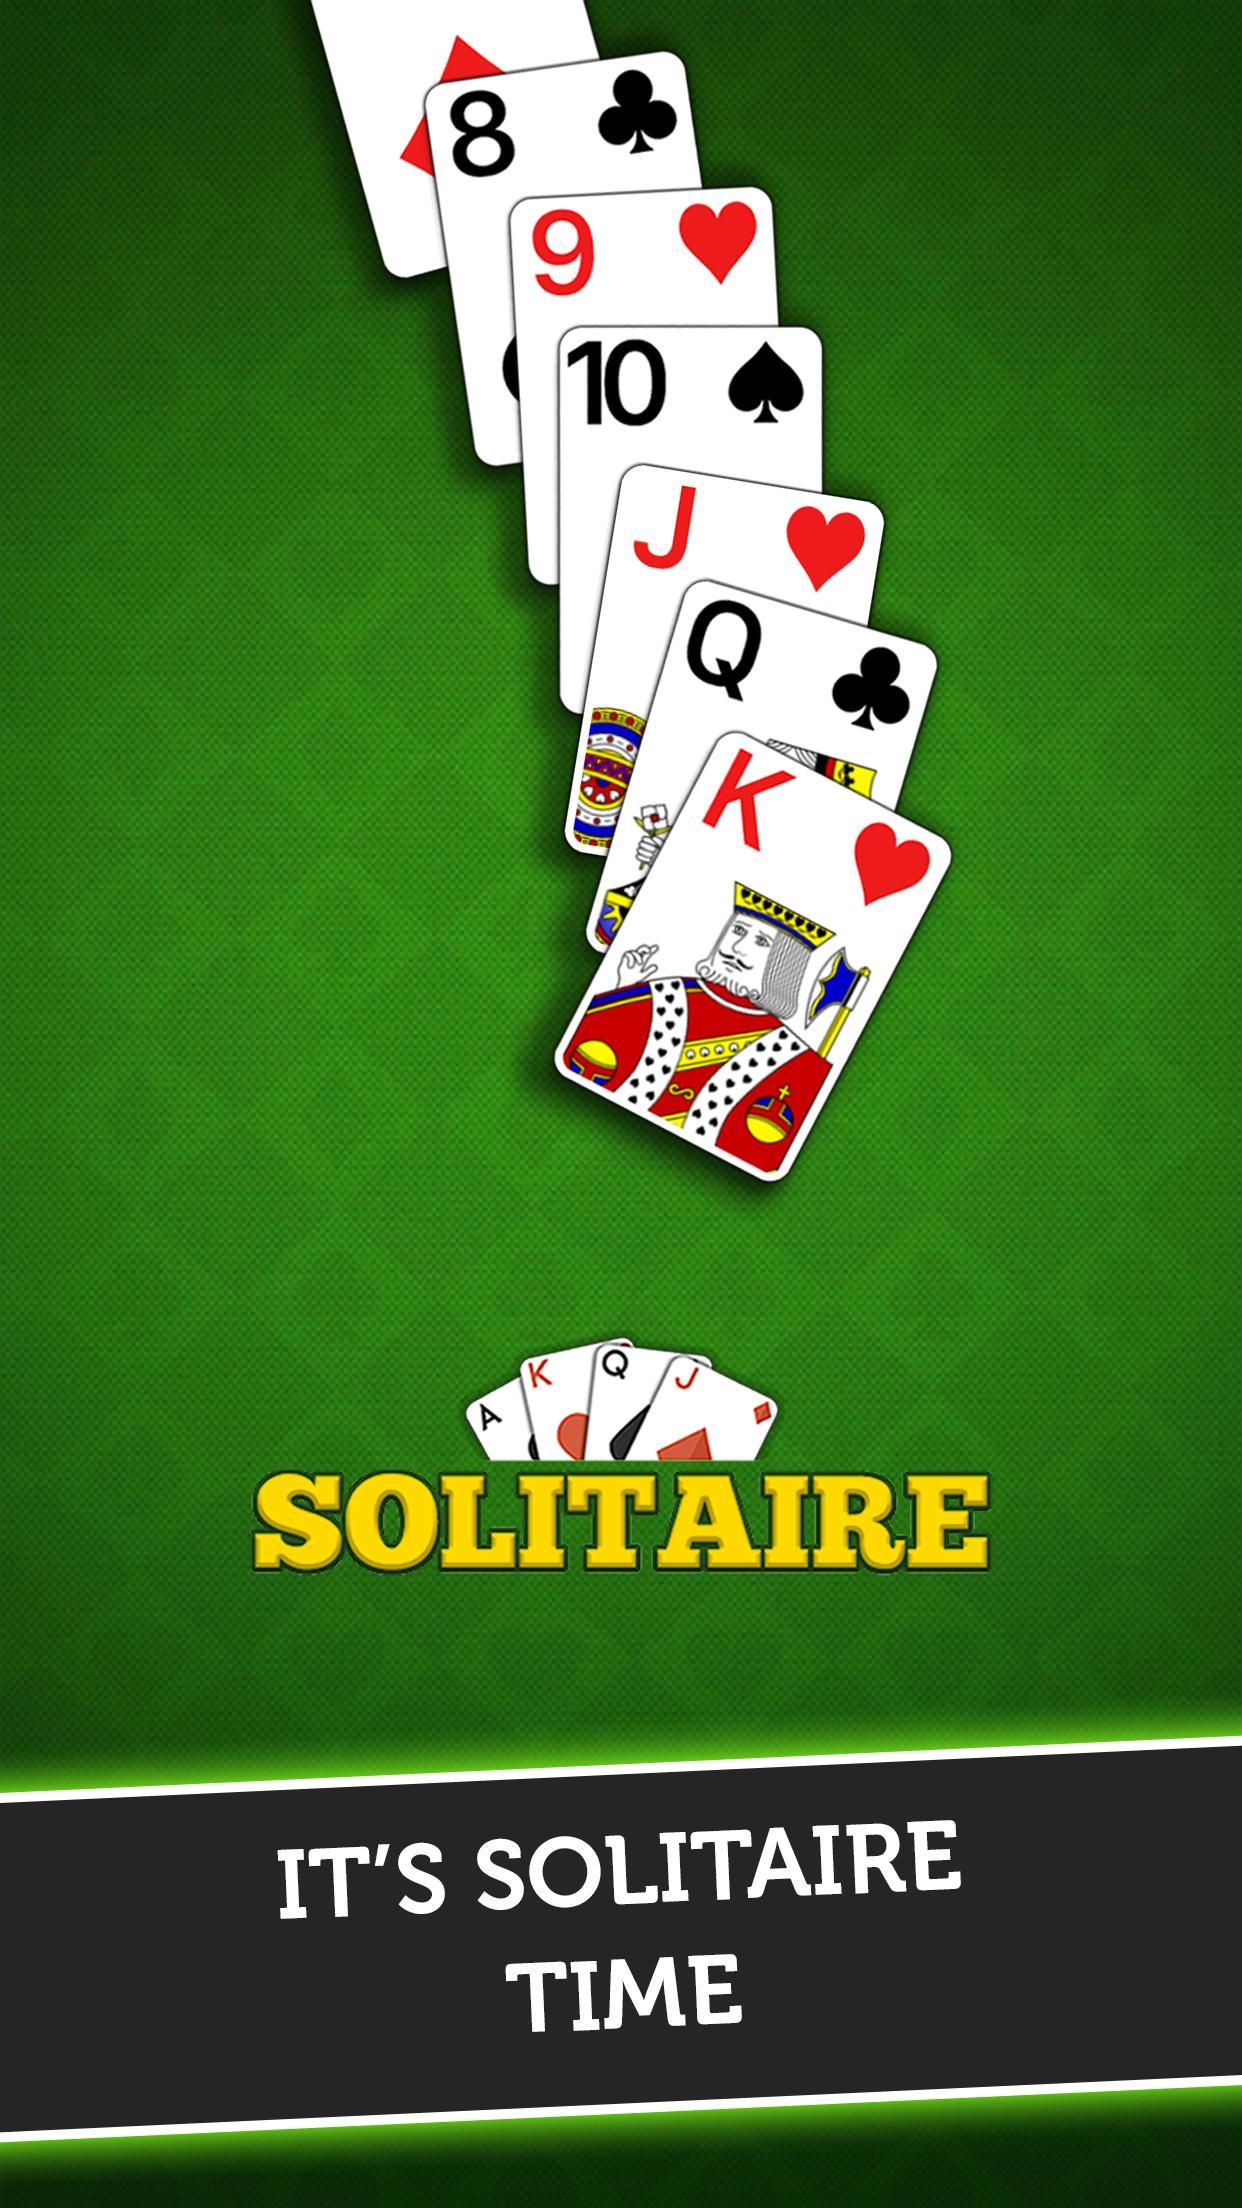 Classic Solitaire 2020 - Free Card Game 1.152.0 Screenshot 6